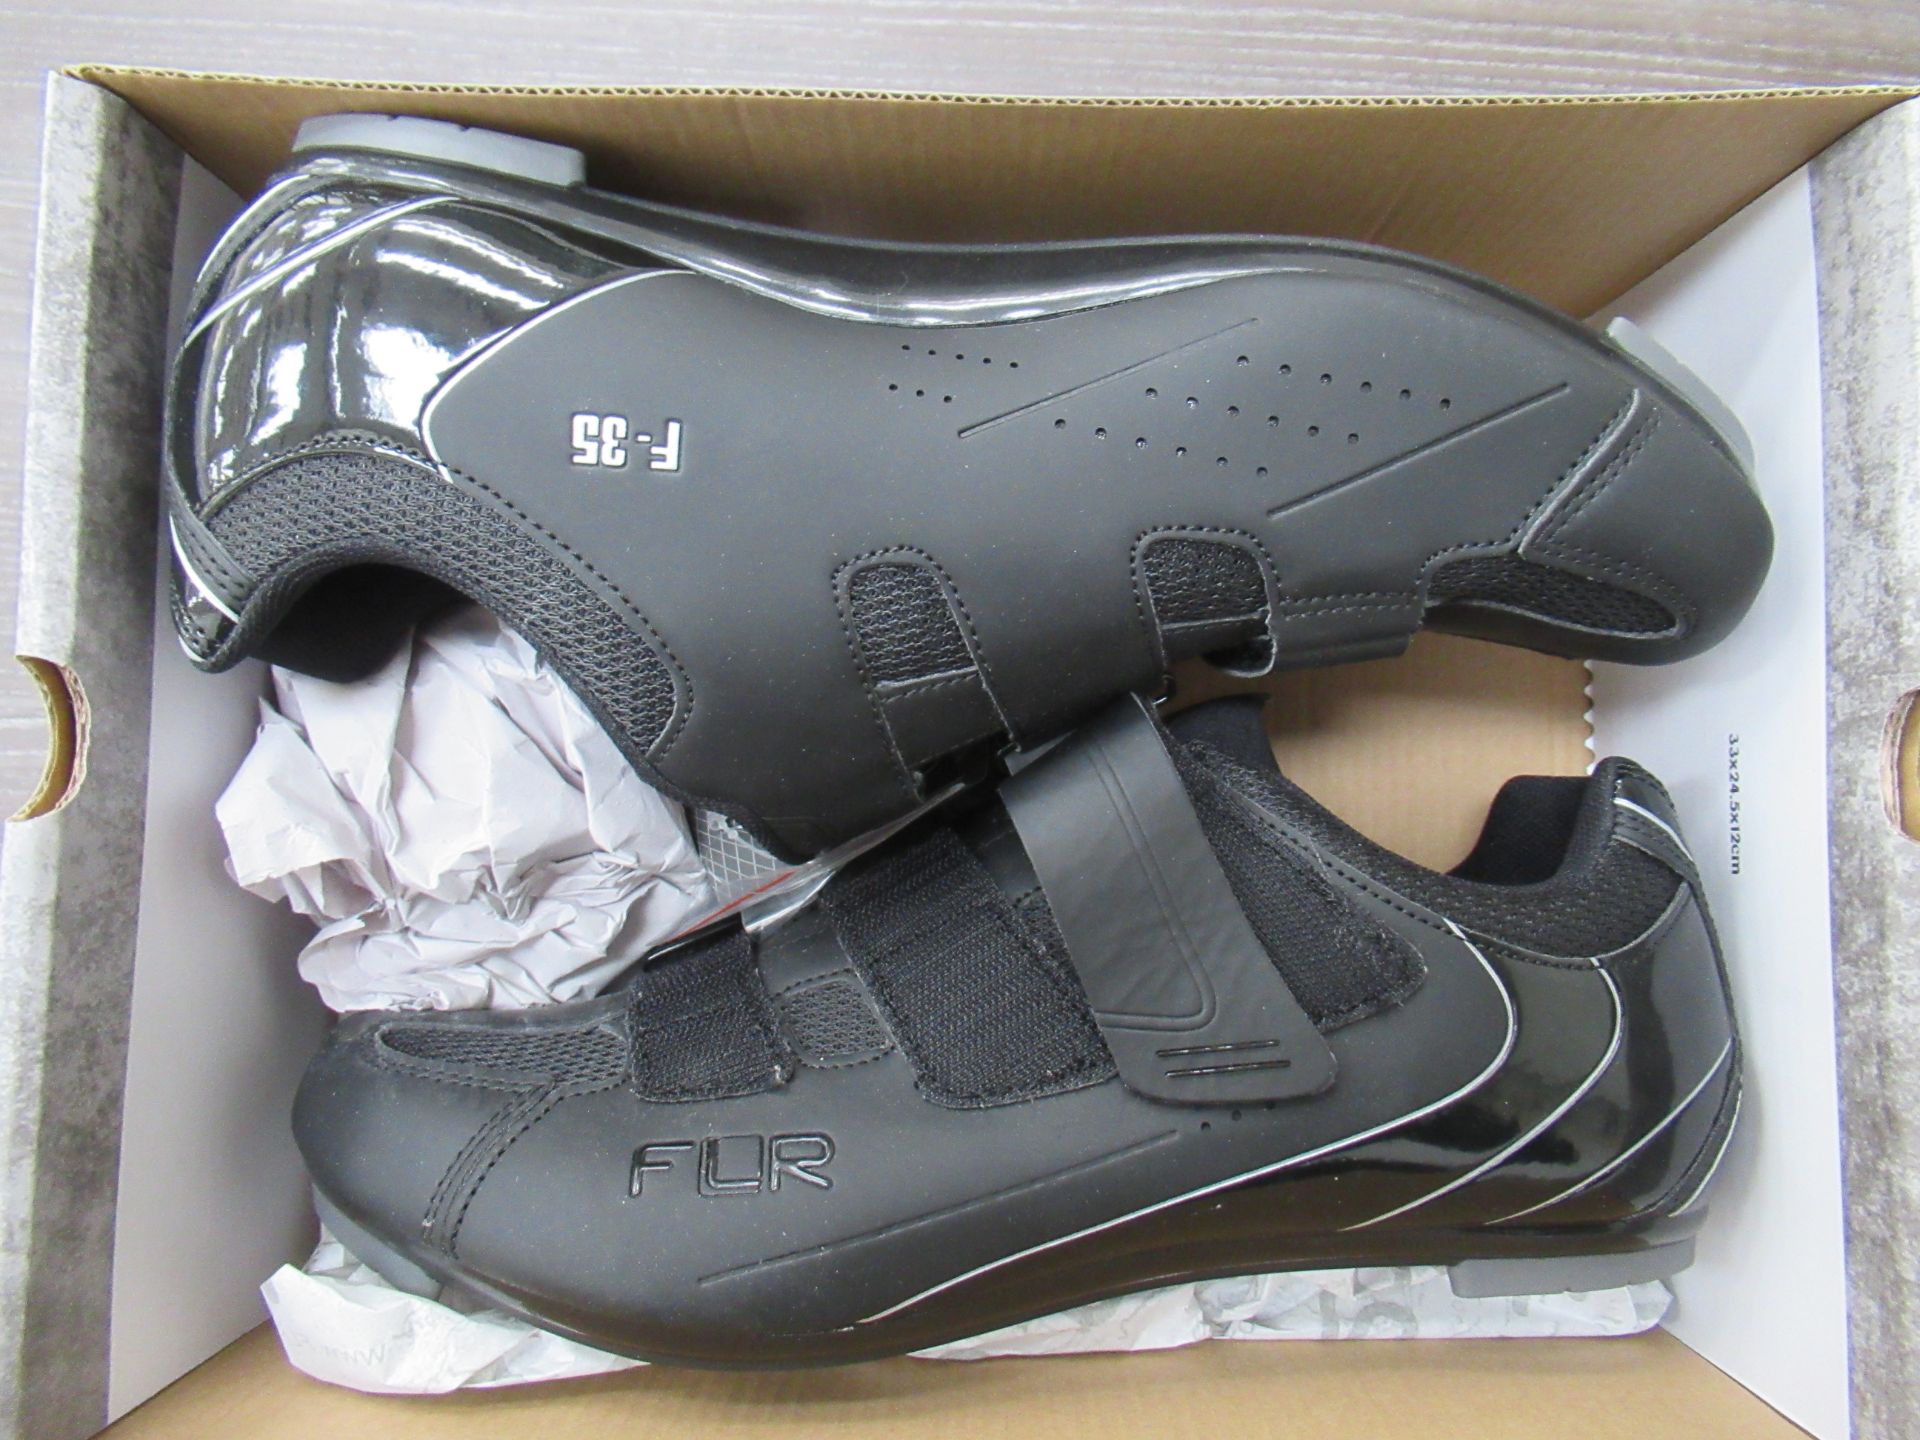 2 x Pairs of FLR cycling shoes - 1 x F-35 III boxed EU size 45 (RRP££64.99) and 1 x F-15 III boxed E - Image 3 of 7